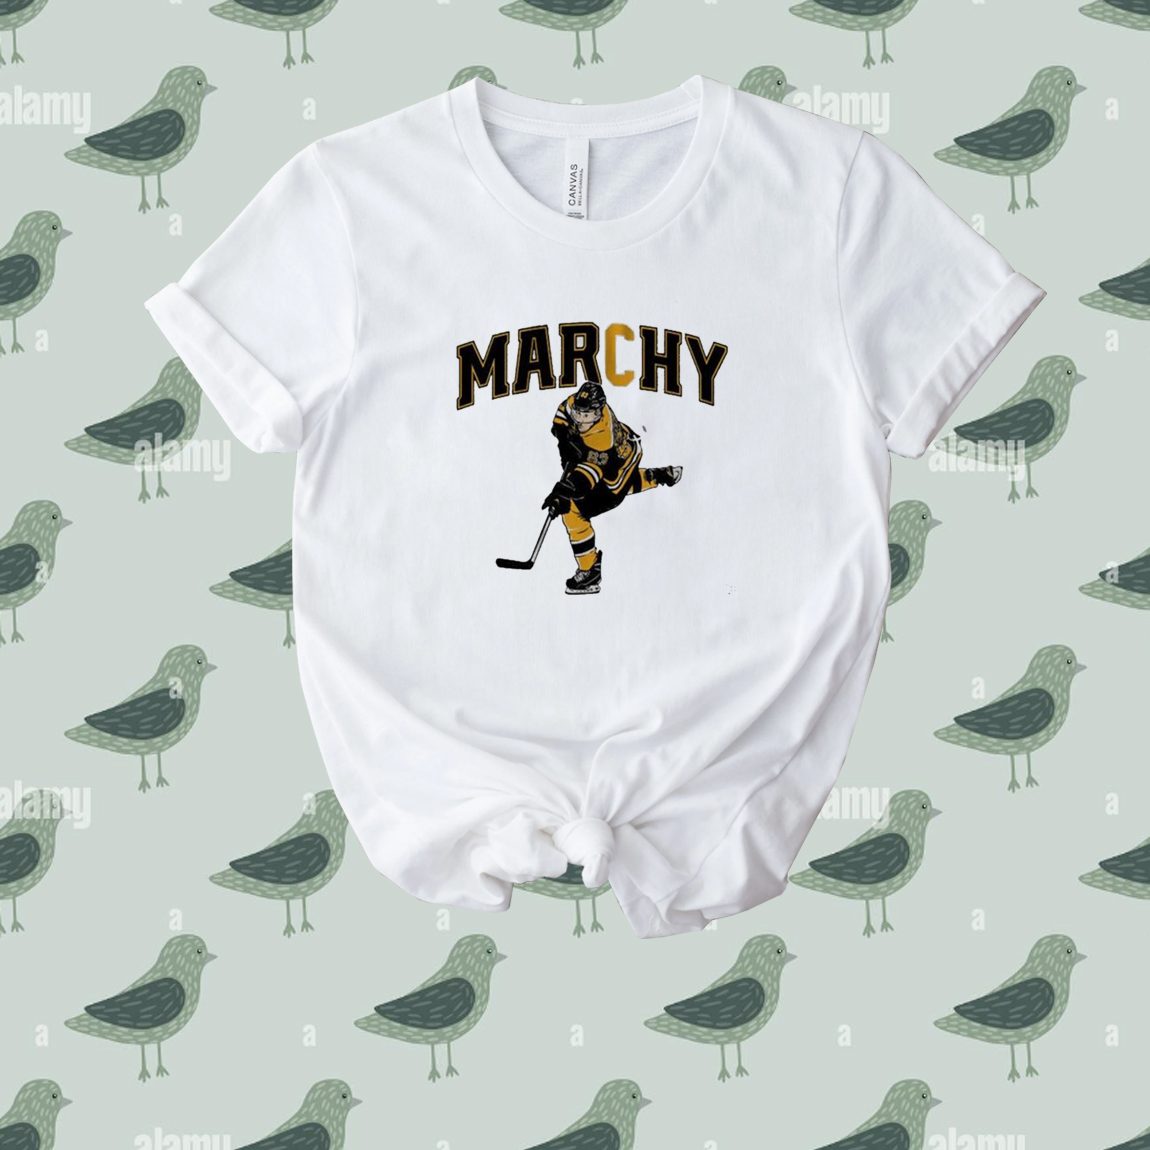 Brad Marchand Captain Marchy T-Shirt - Yesweli